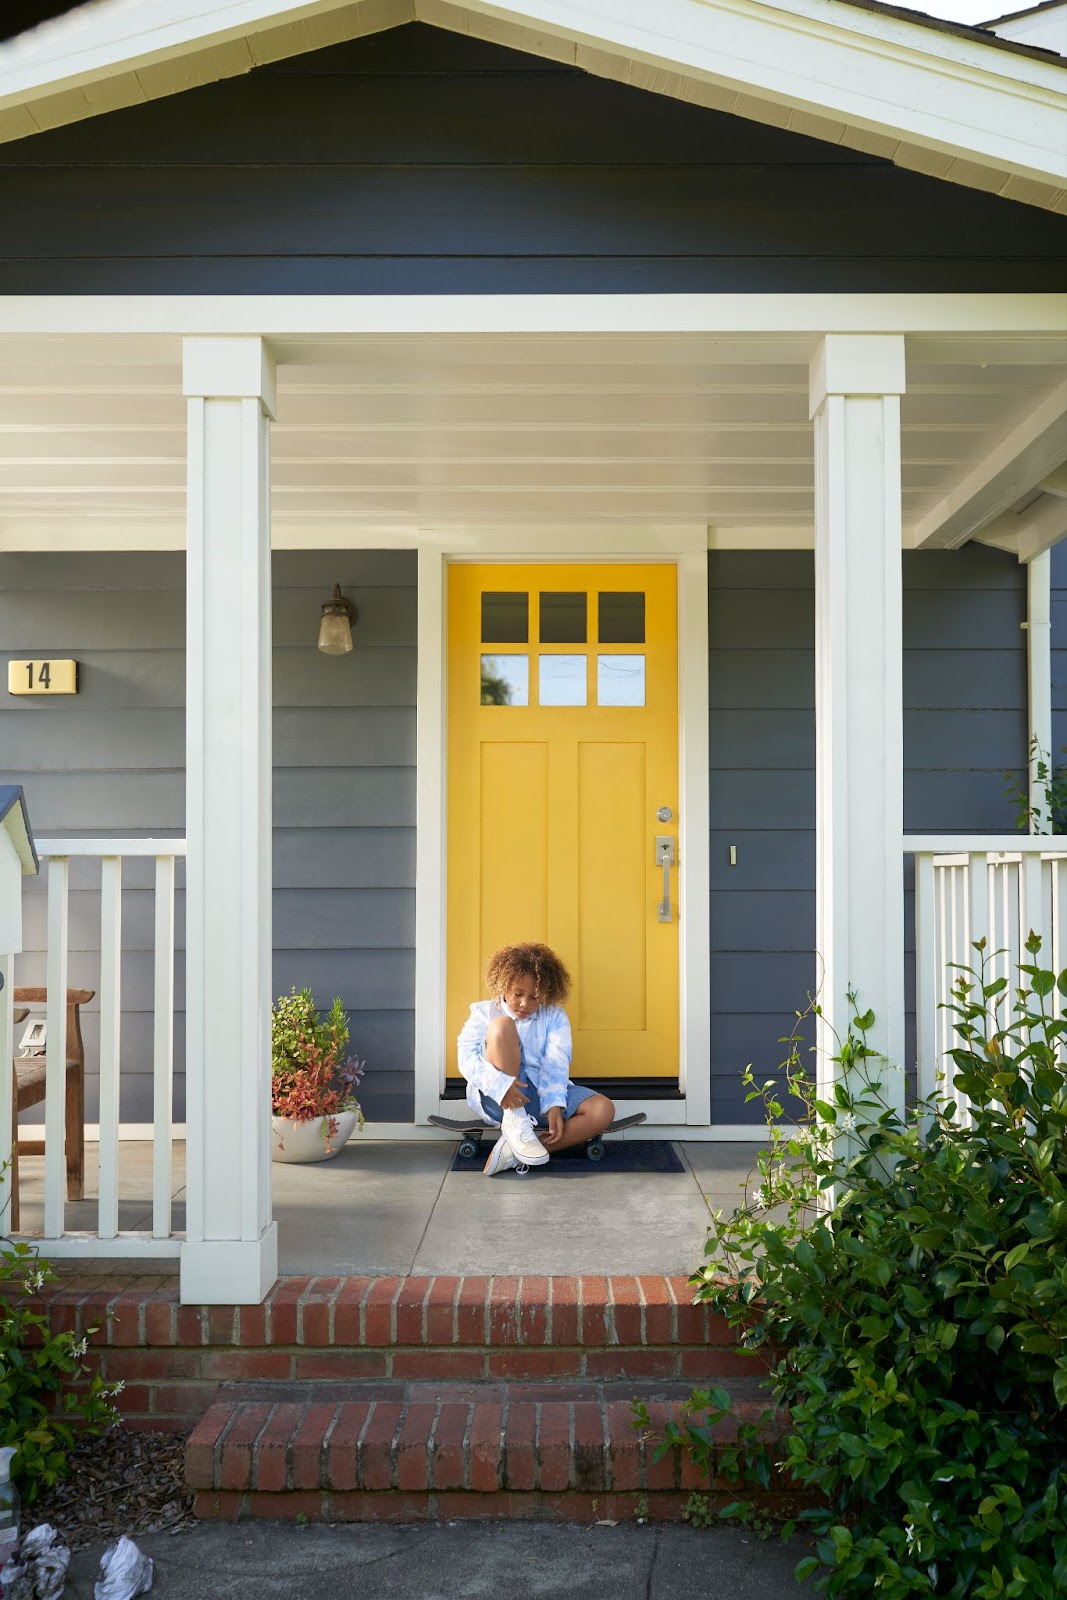 The front of a grey house with a vibrant yellow front door and a kid sitting on the porch.